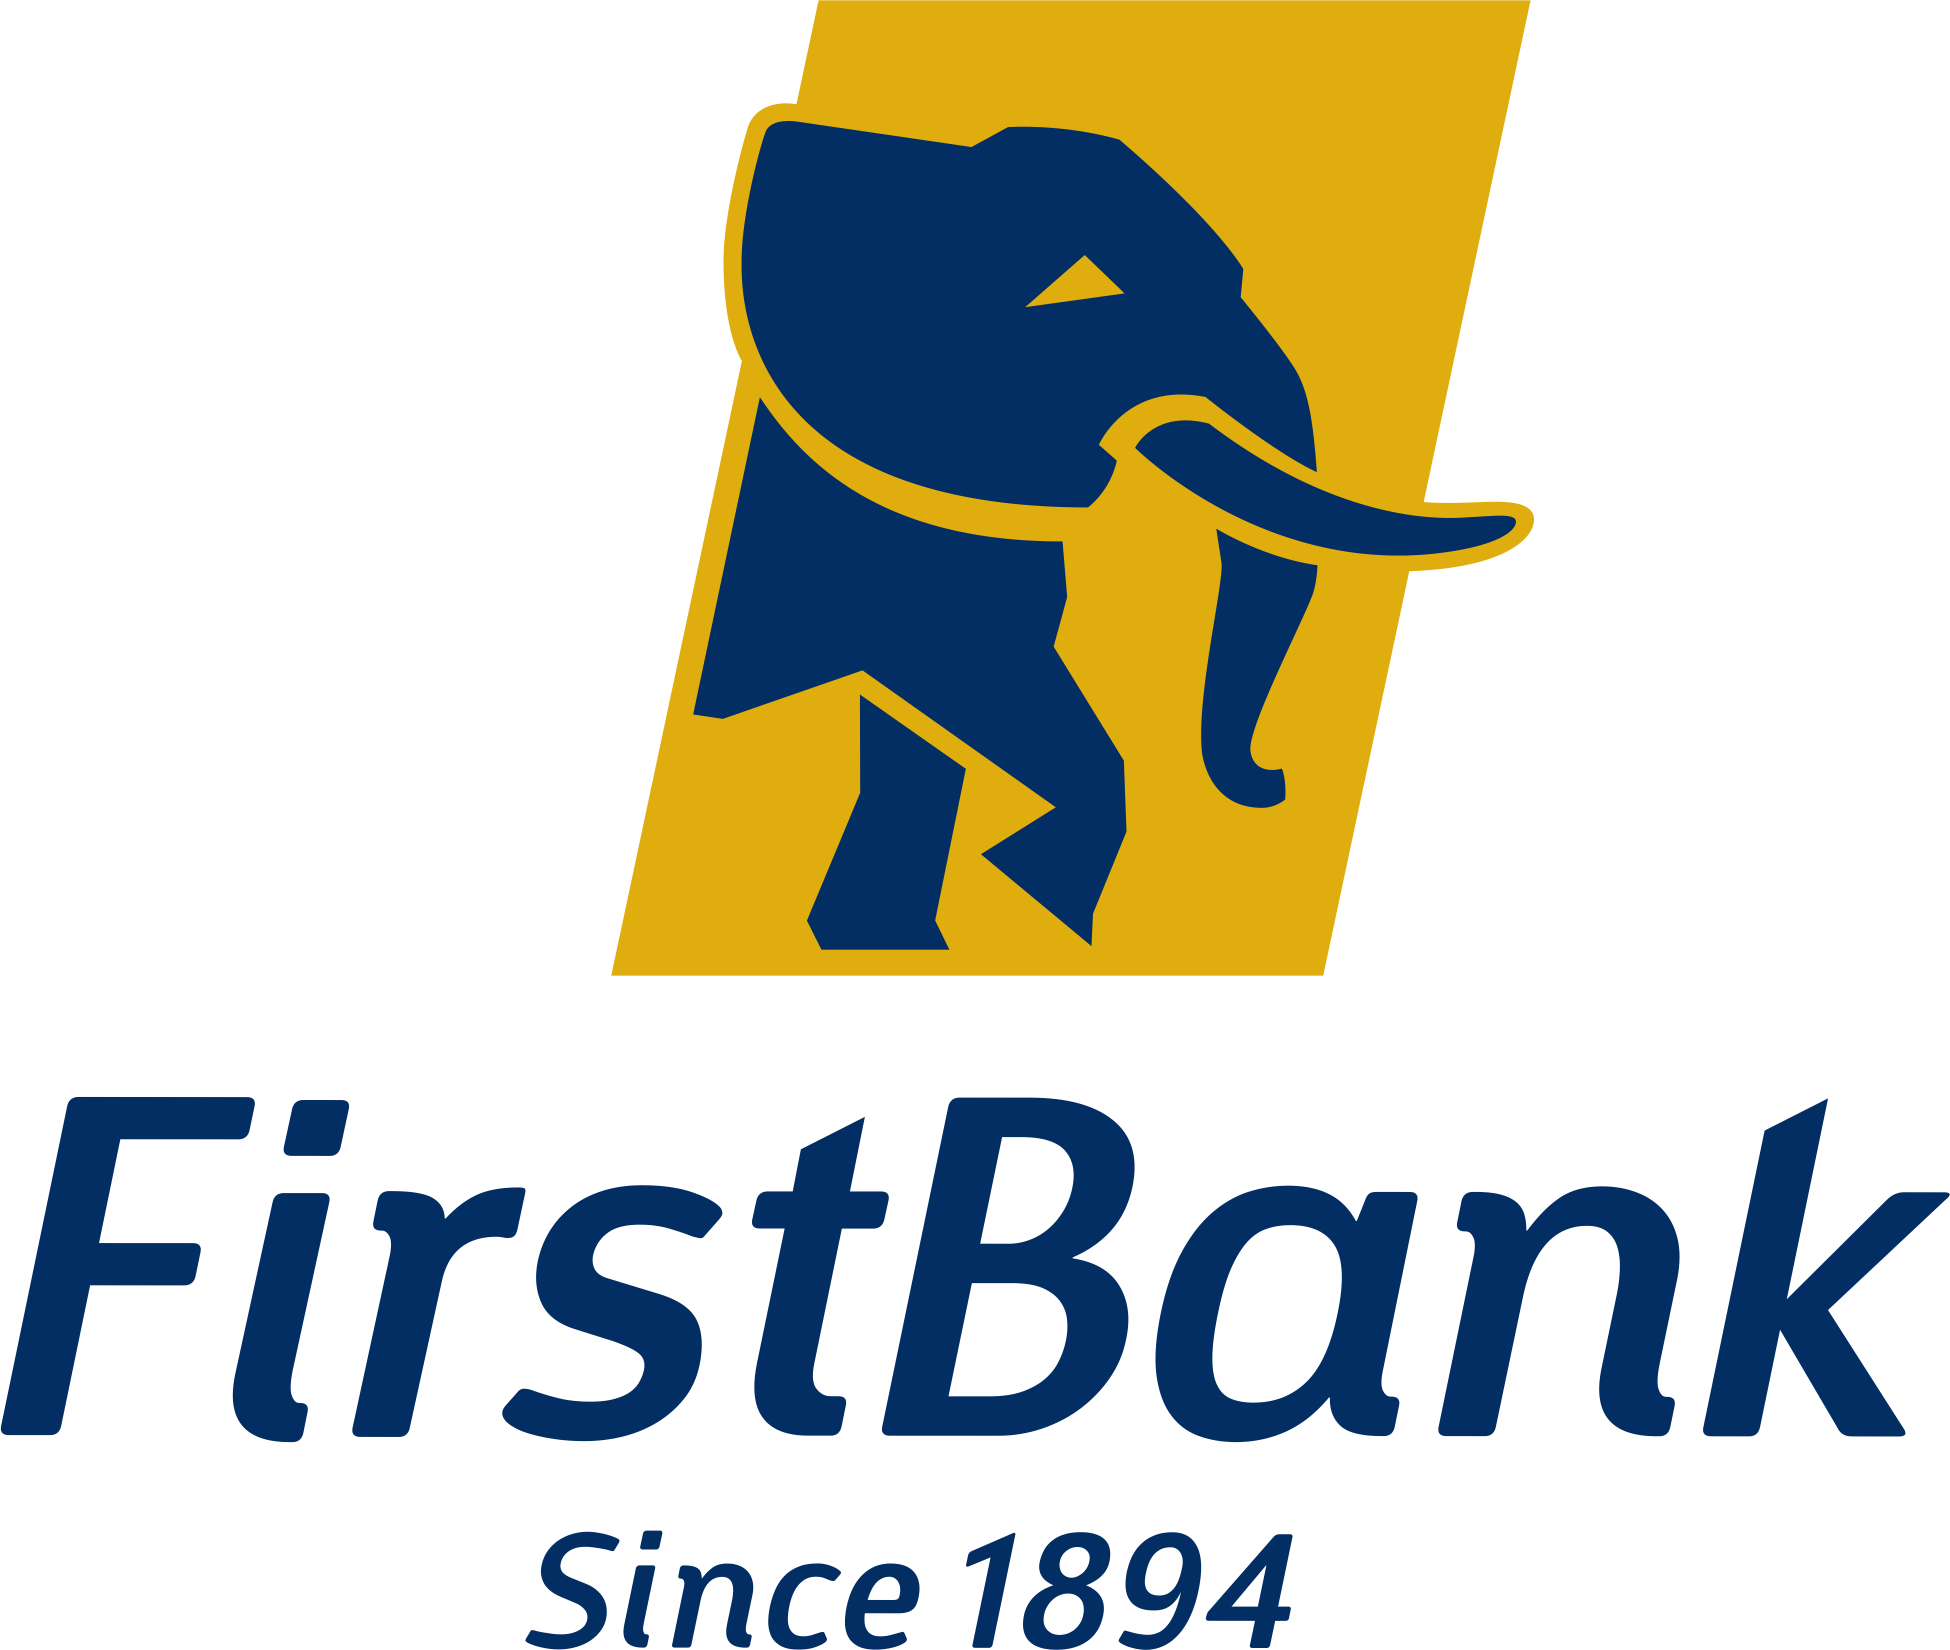 ADEDUNTAN: FIRSTBANK IS FUTURE-PROOF AND REMAINS COMMITTED TO THE GOLD STANDARD OF EXCELLENCE IN BANKING